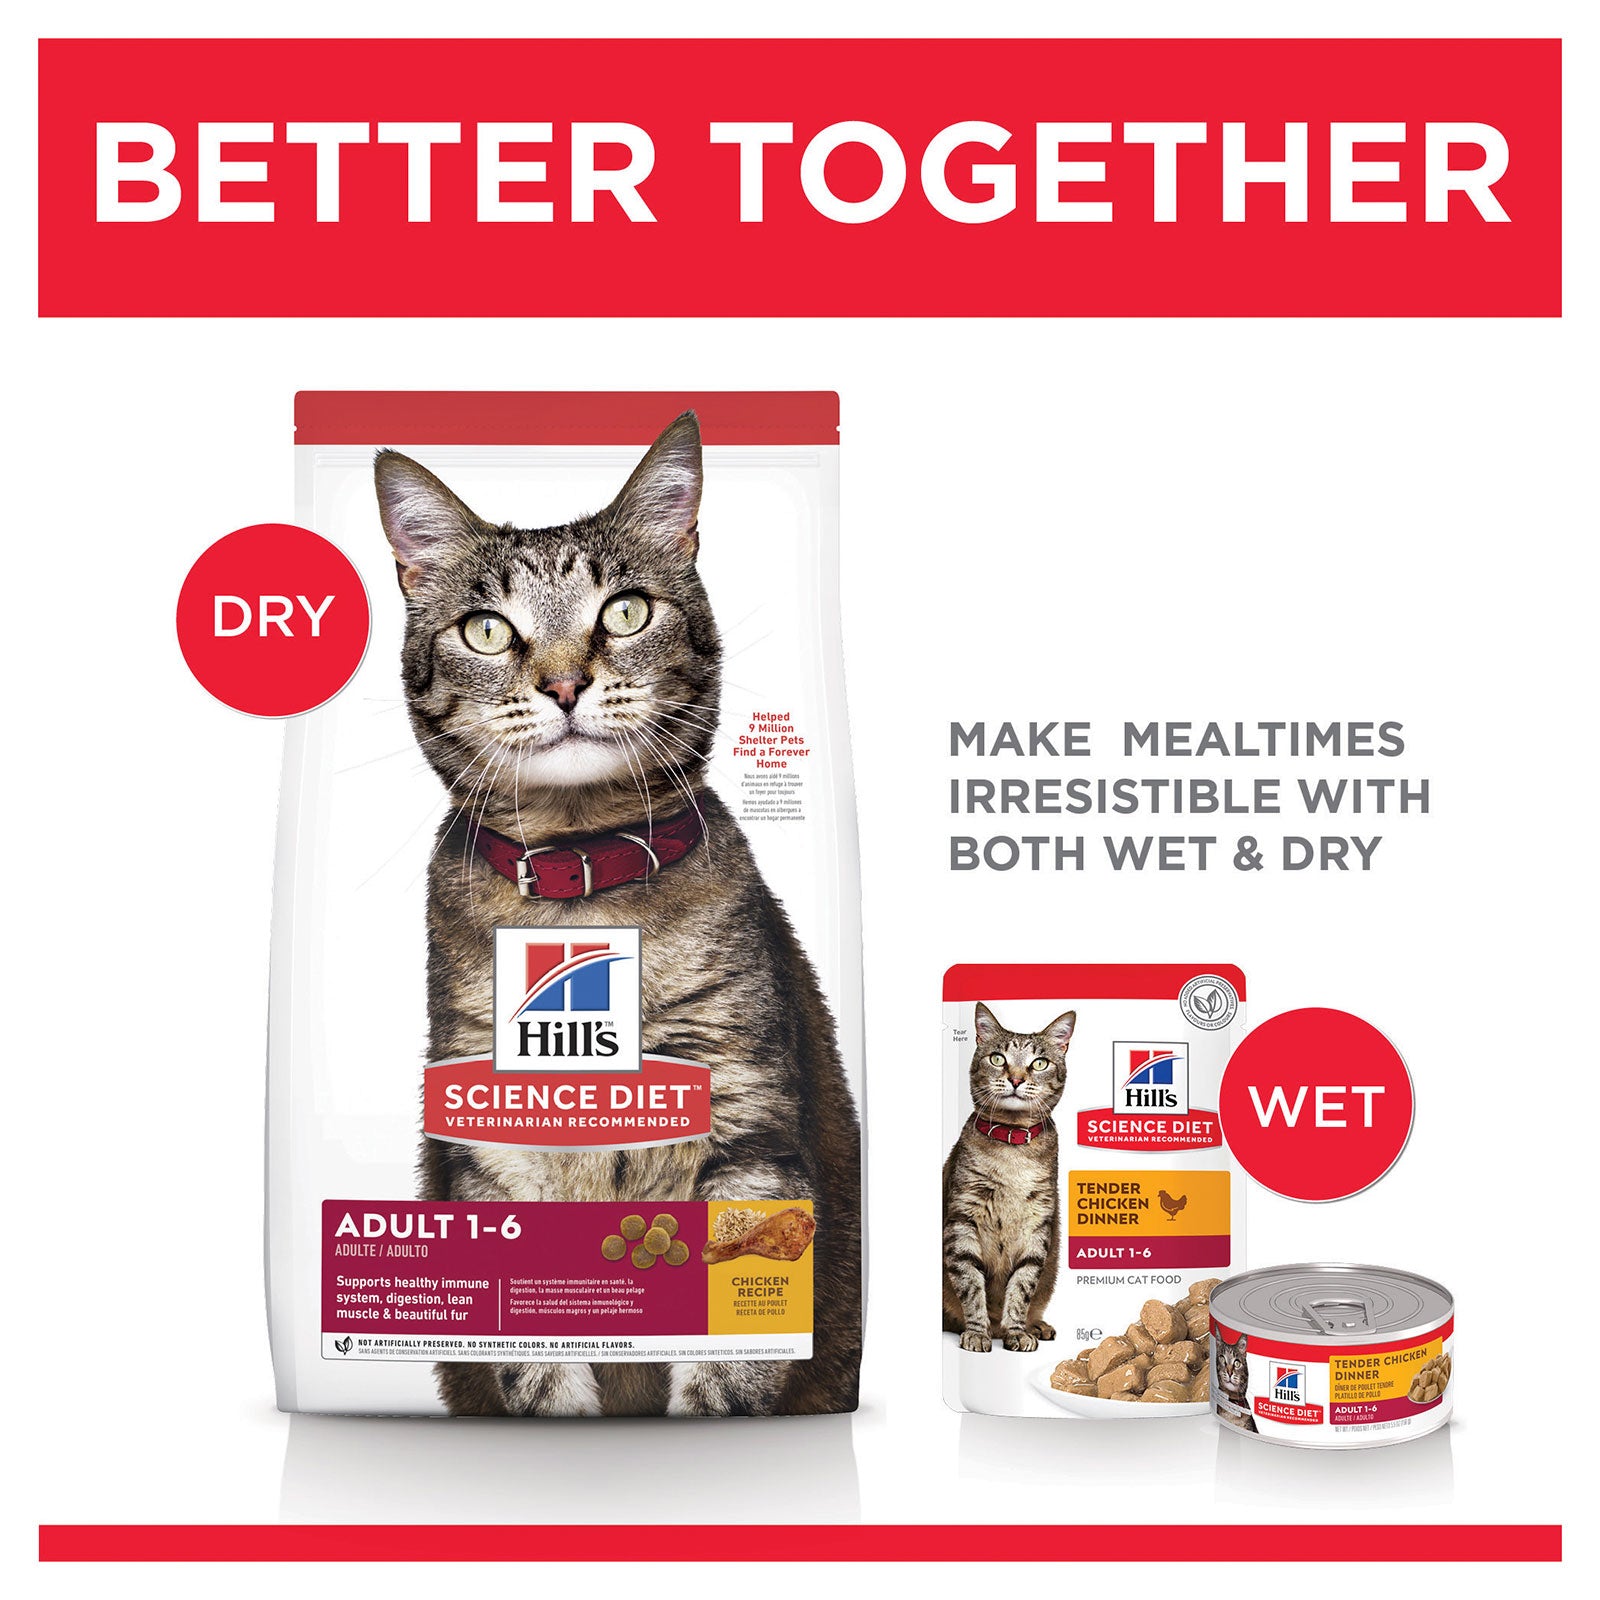 Hill's Science Diet Cat Food Adult